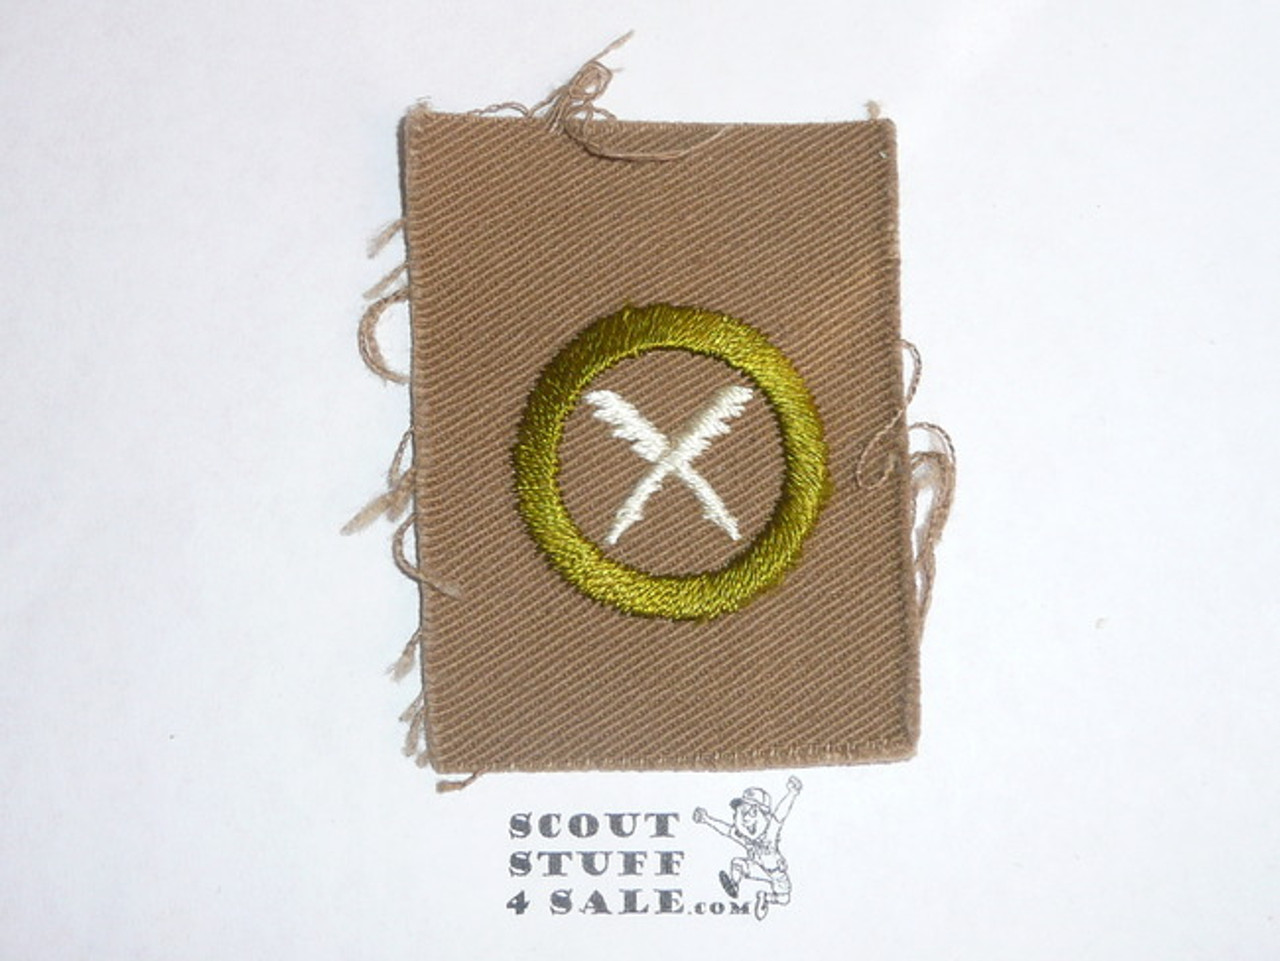 Business - Type A - Square Tan Merit Badge (1911-1933), oversized cloth, black striped back